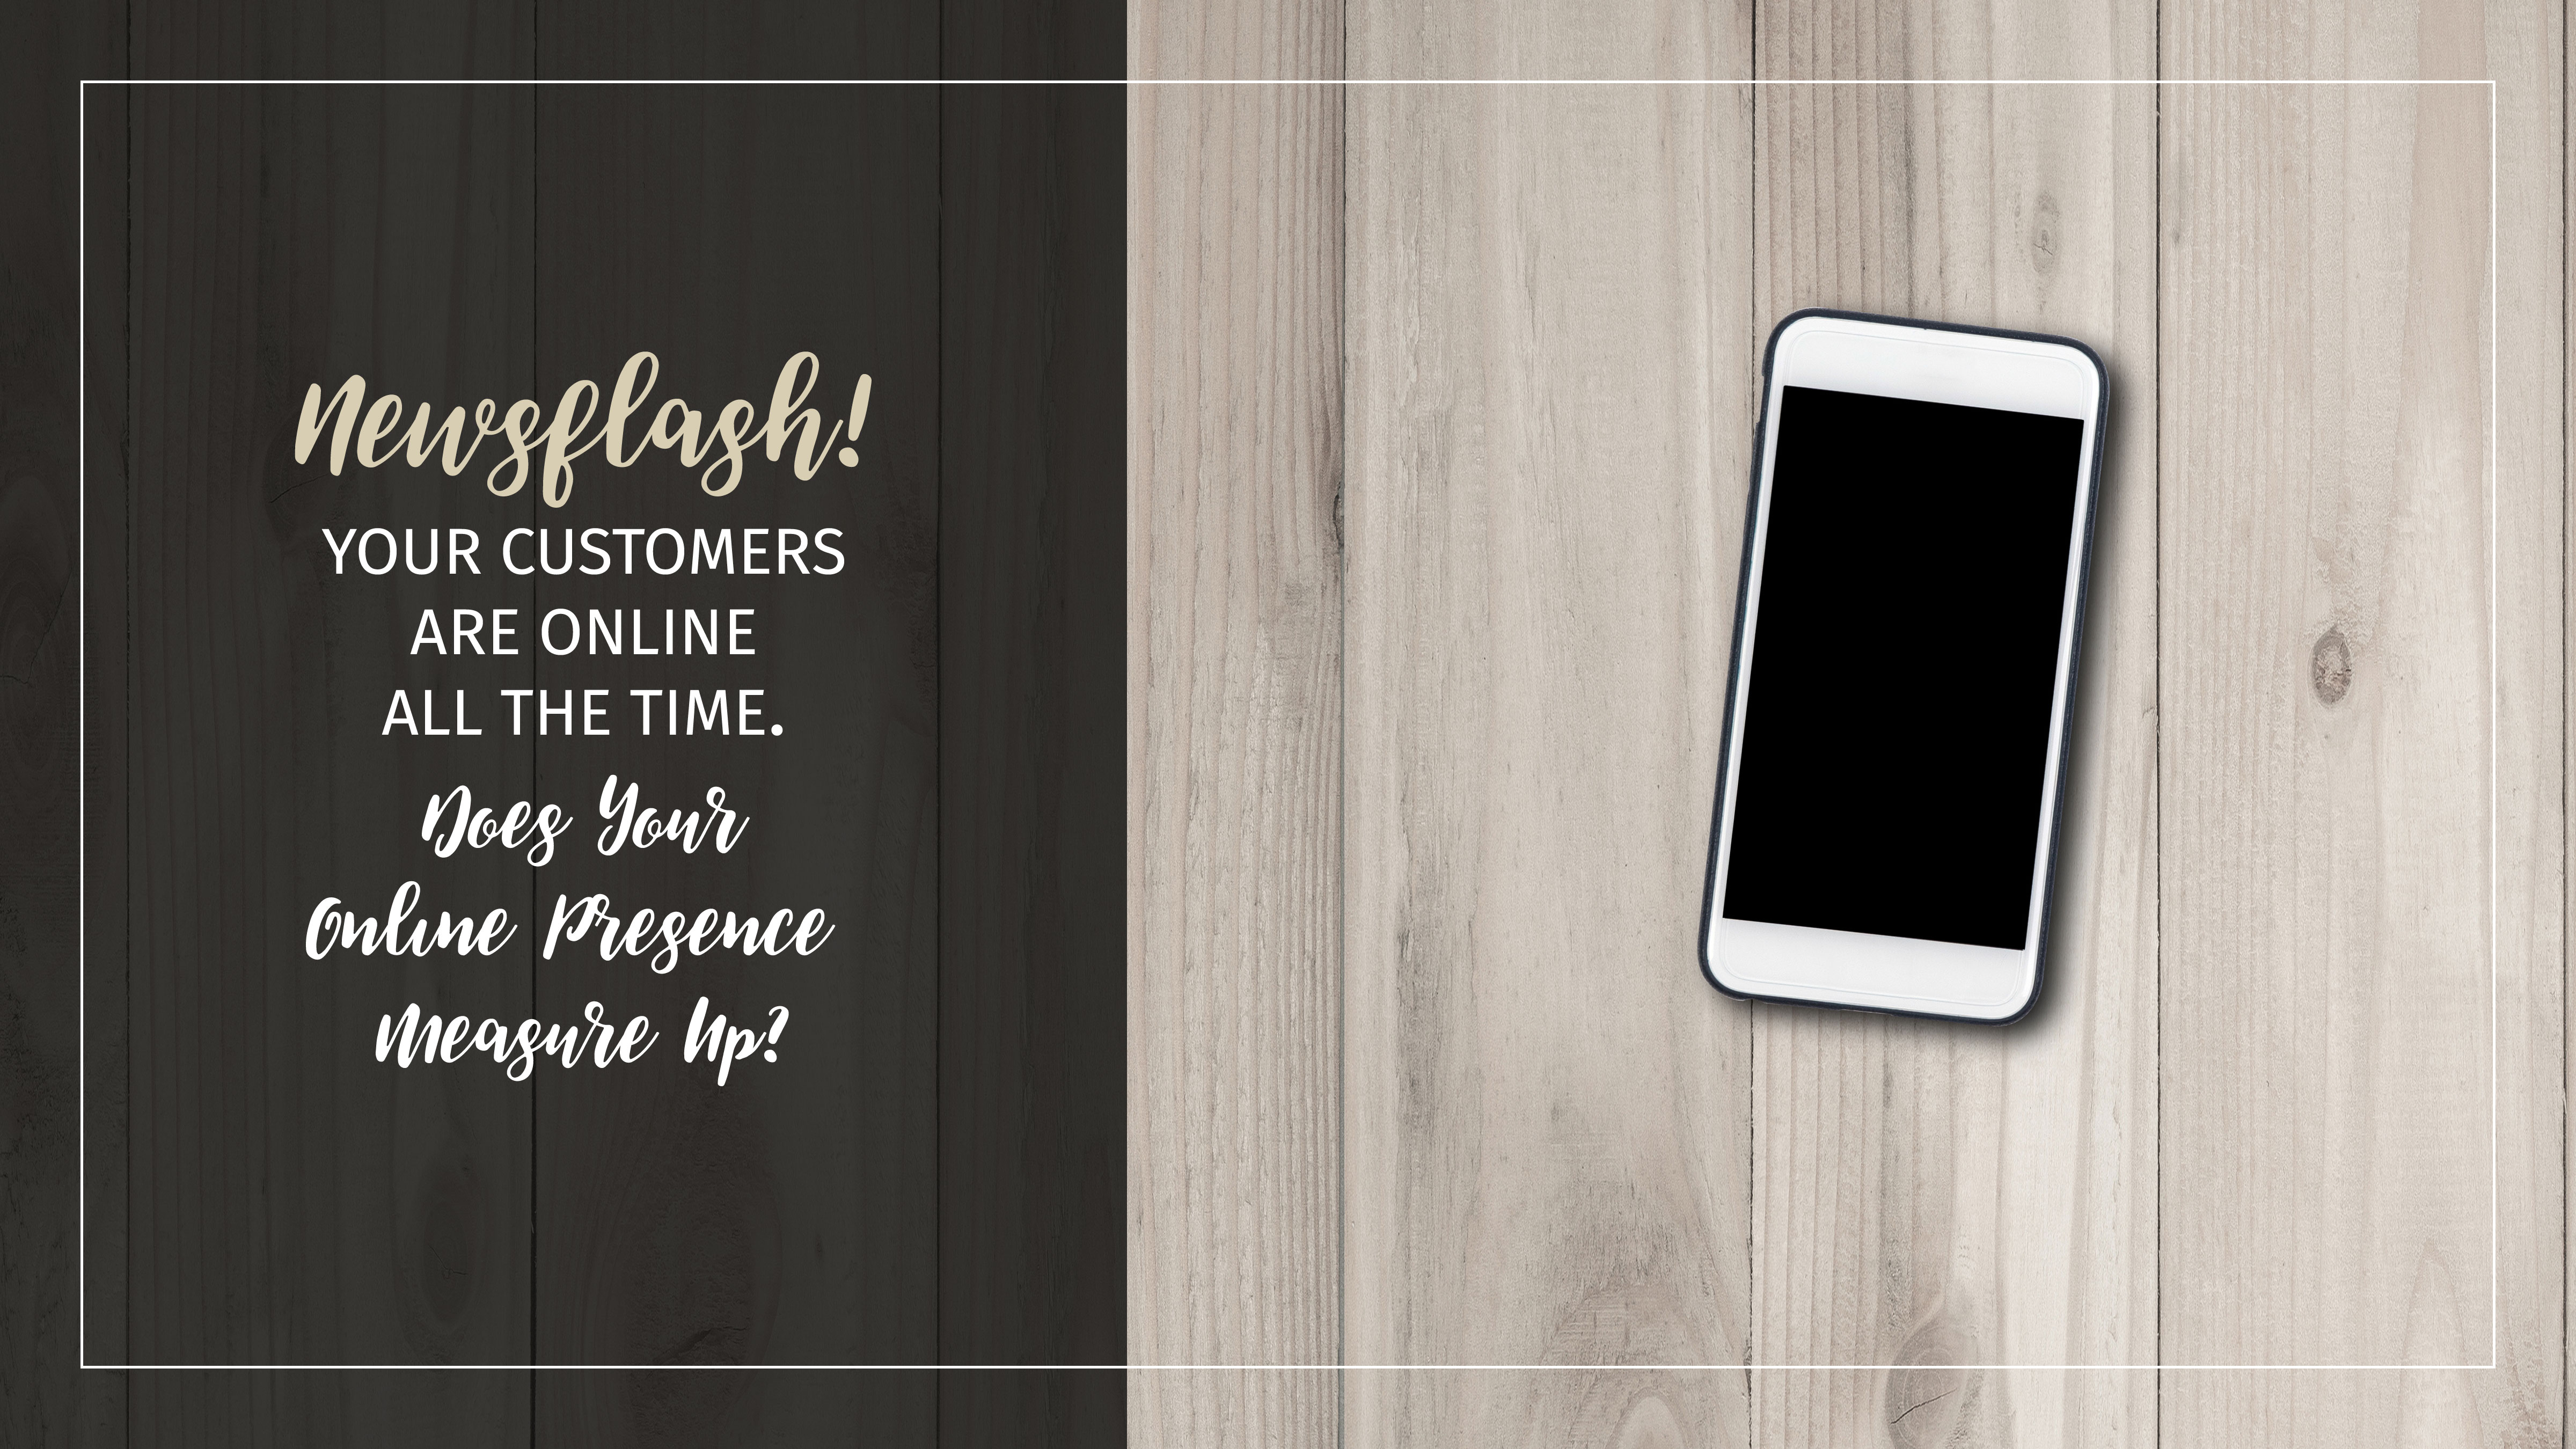 Text: Newsflash! Your customers are online all the time. Does your online presence measure up? Background: Cellphone sitting on a wooden table